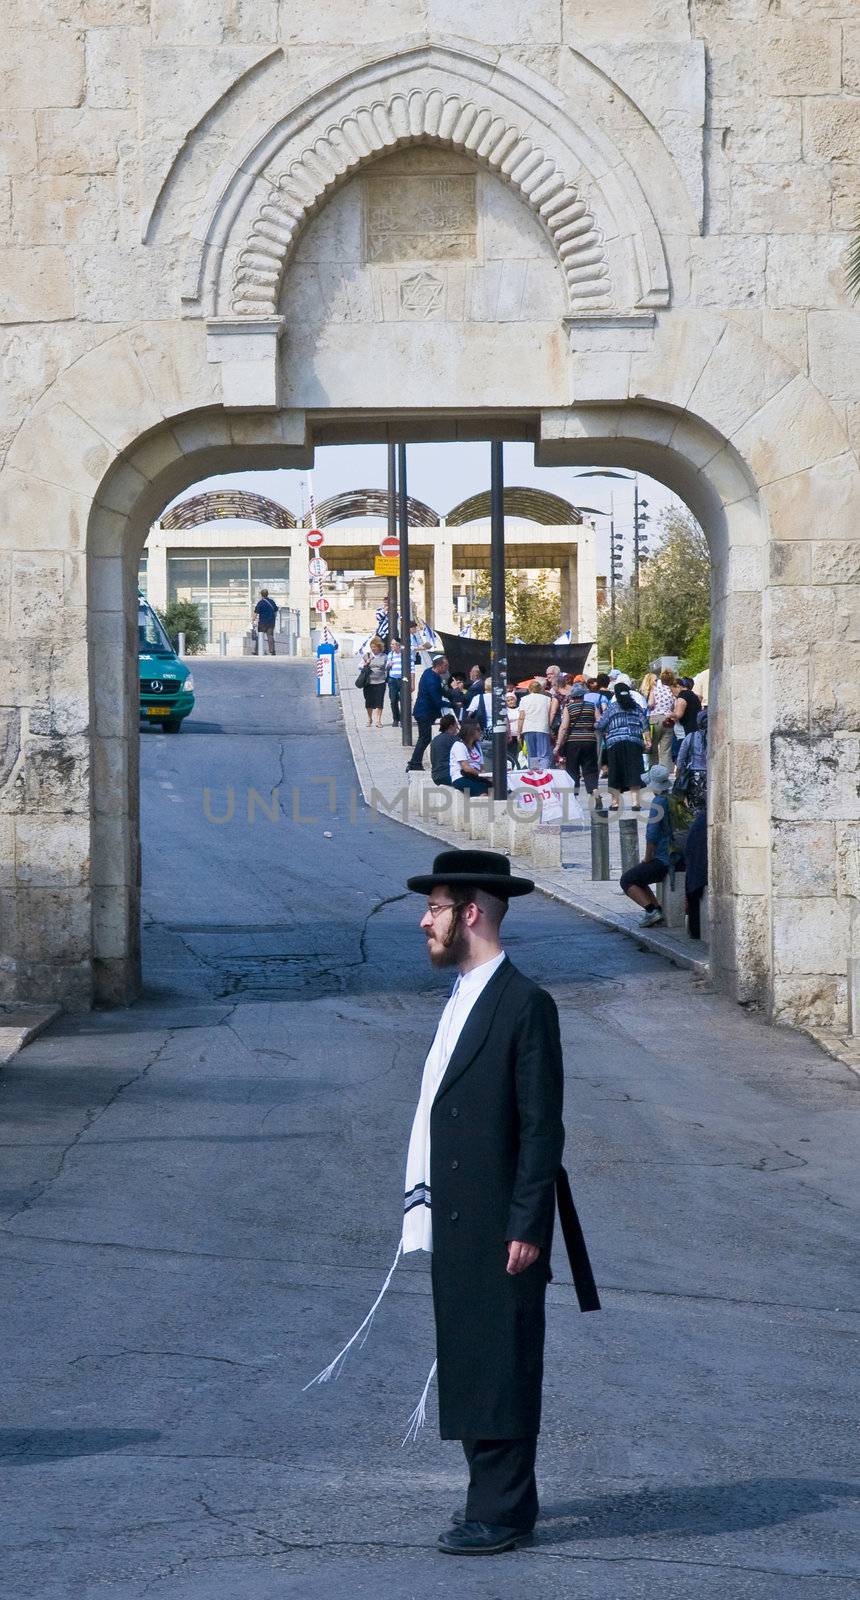 JERUSALEM - OCTOBER 06 2011 : An ultra- Orthodox Jewish man stand near the Dung gate in the old city of Jerusalem , Israel